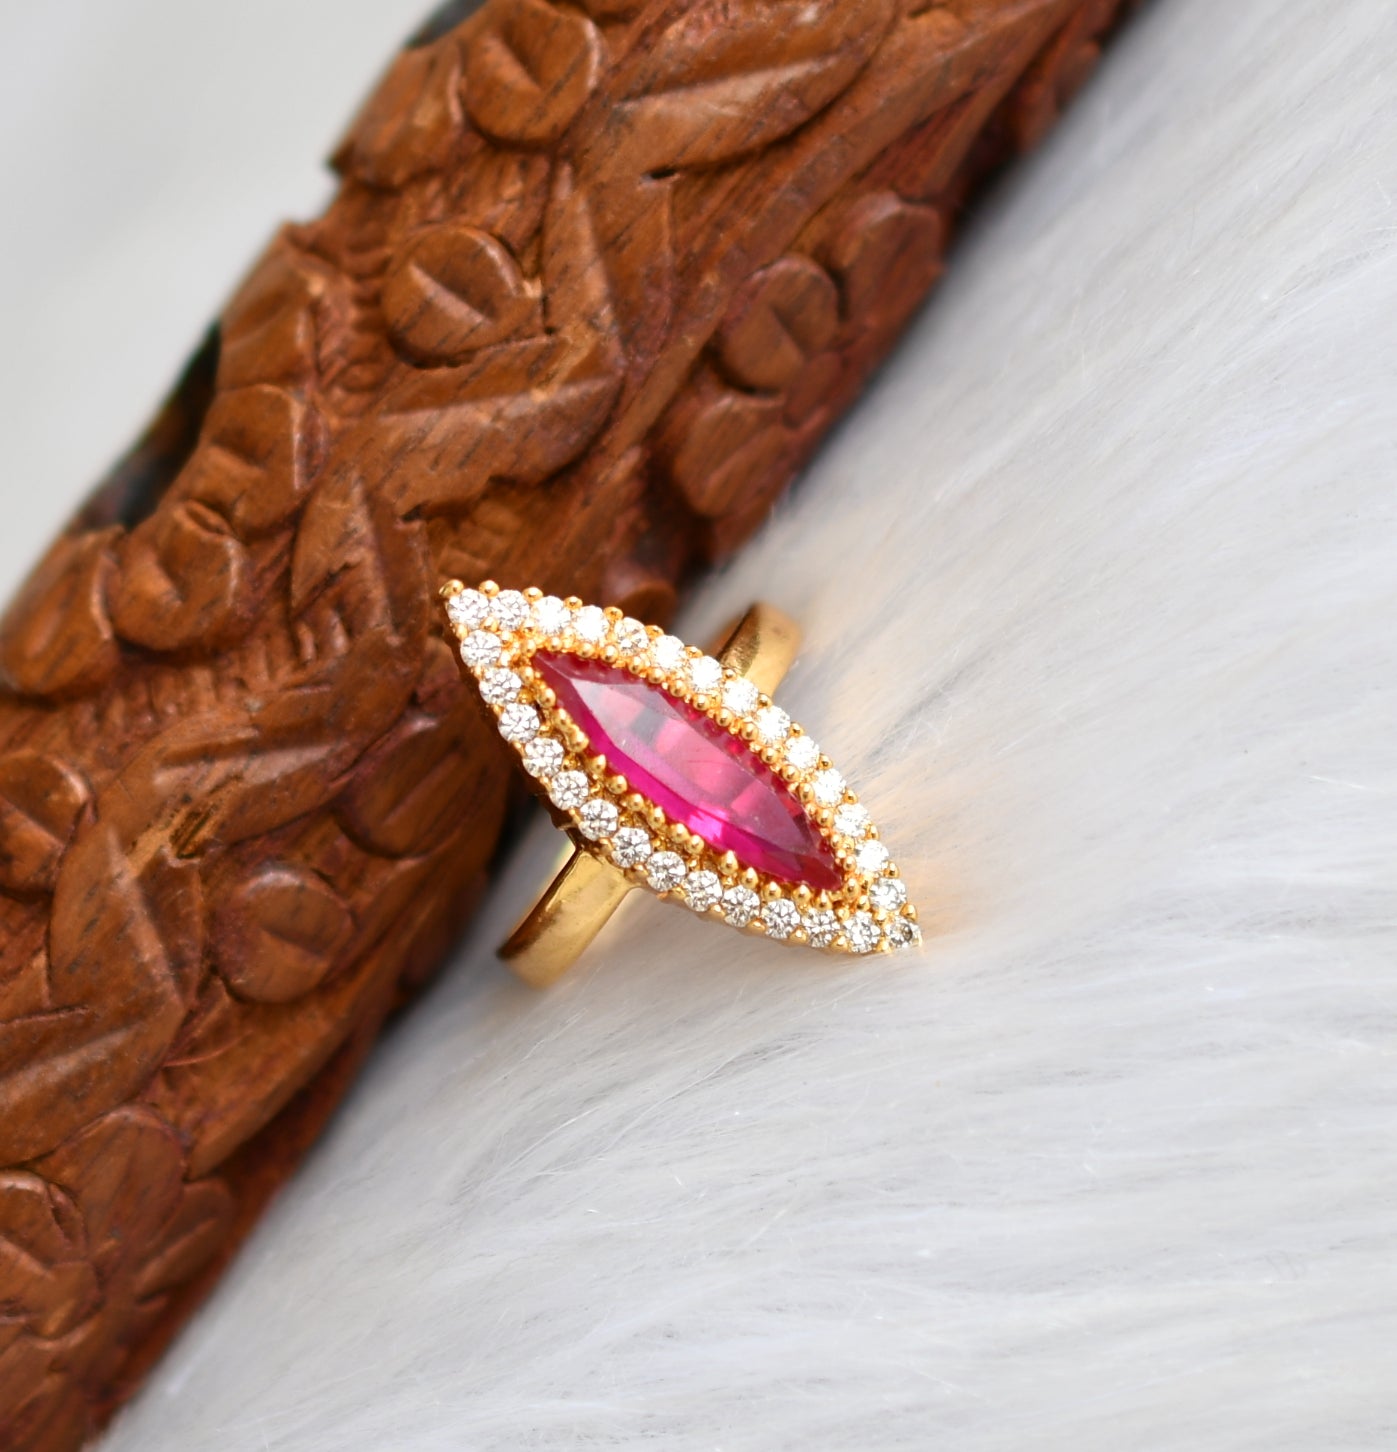 Buy quality 22k gold ruby stone ladies & gents ring in Ahmedabad